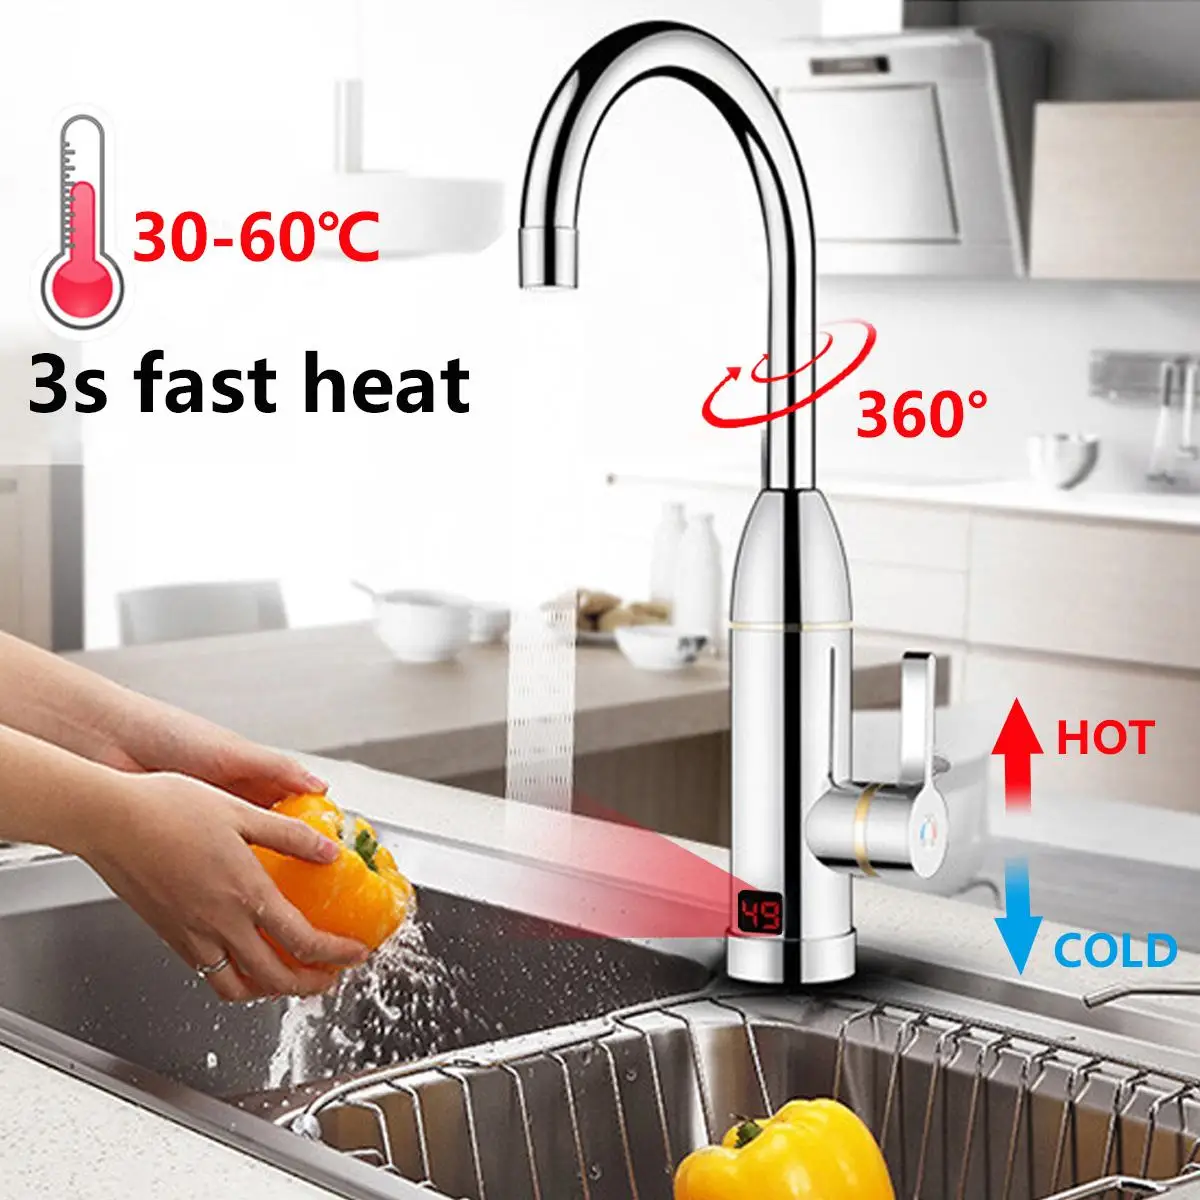 

3000W 220V Kitchen Instant Heating Faucet Heater Hot Cold Dual-Use Tankless Water Quickly Heating Tap Shower with LED Display